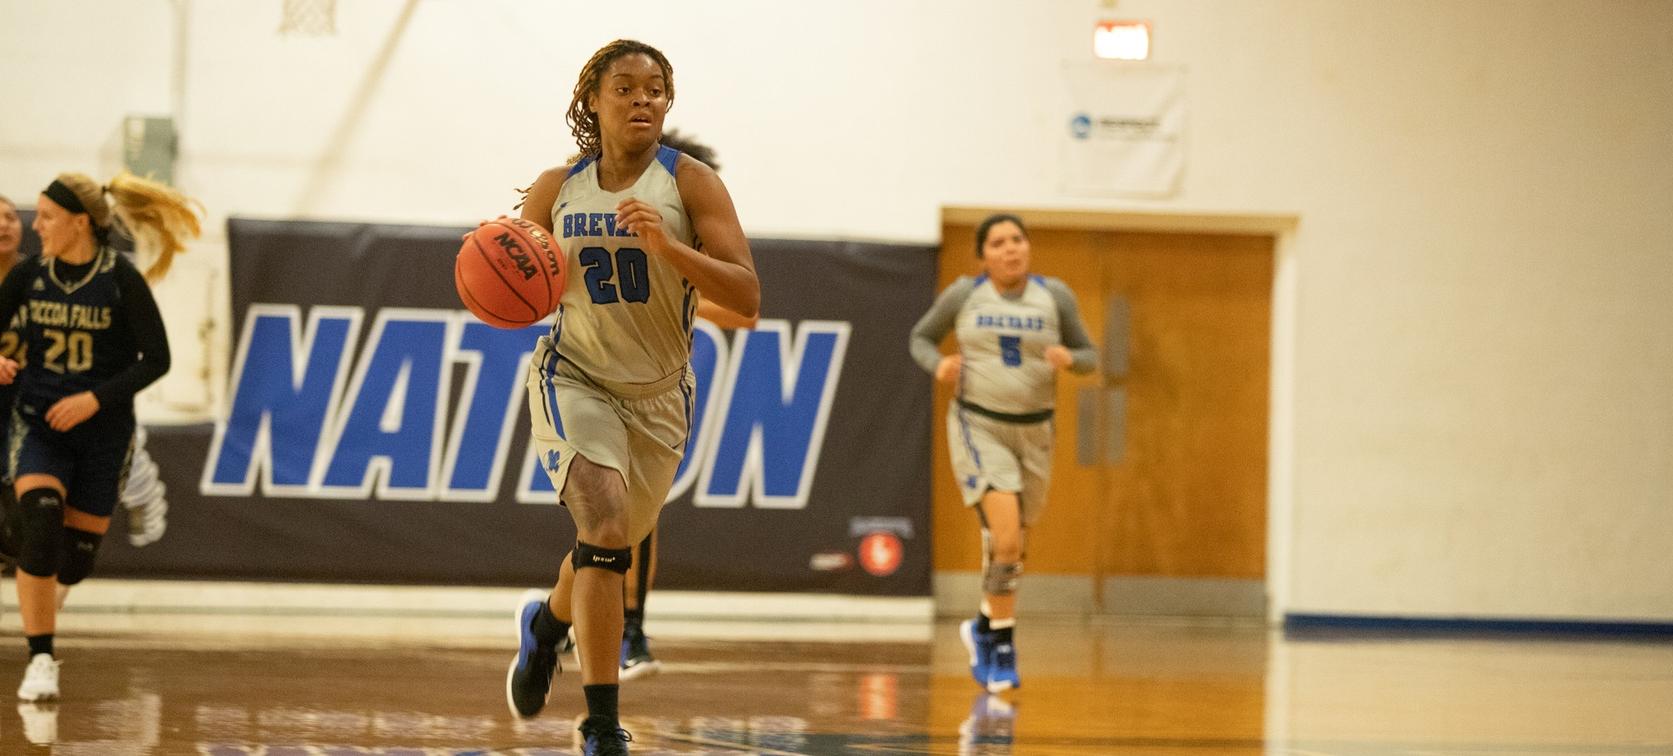 Junior forward Deja Riddick posted a new career-high 22 points in Brevard's season-opening 65-56 victory over Toccoa Falls College (Photo courtesy of Thom Kennedy '21).